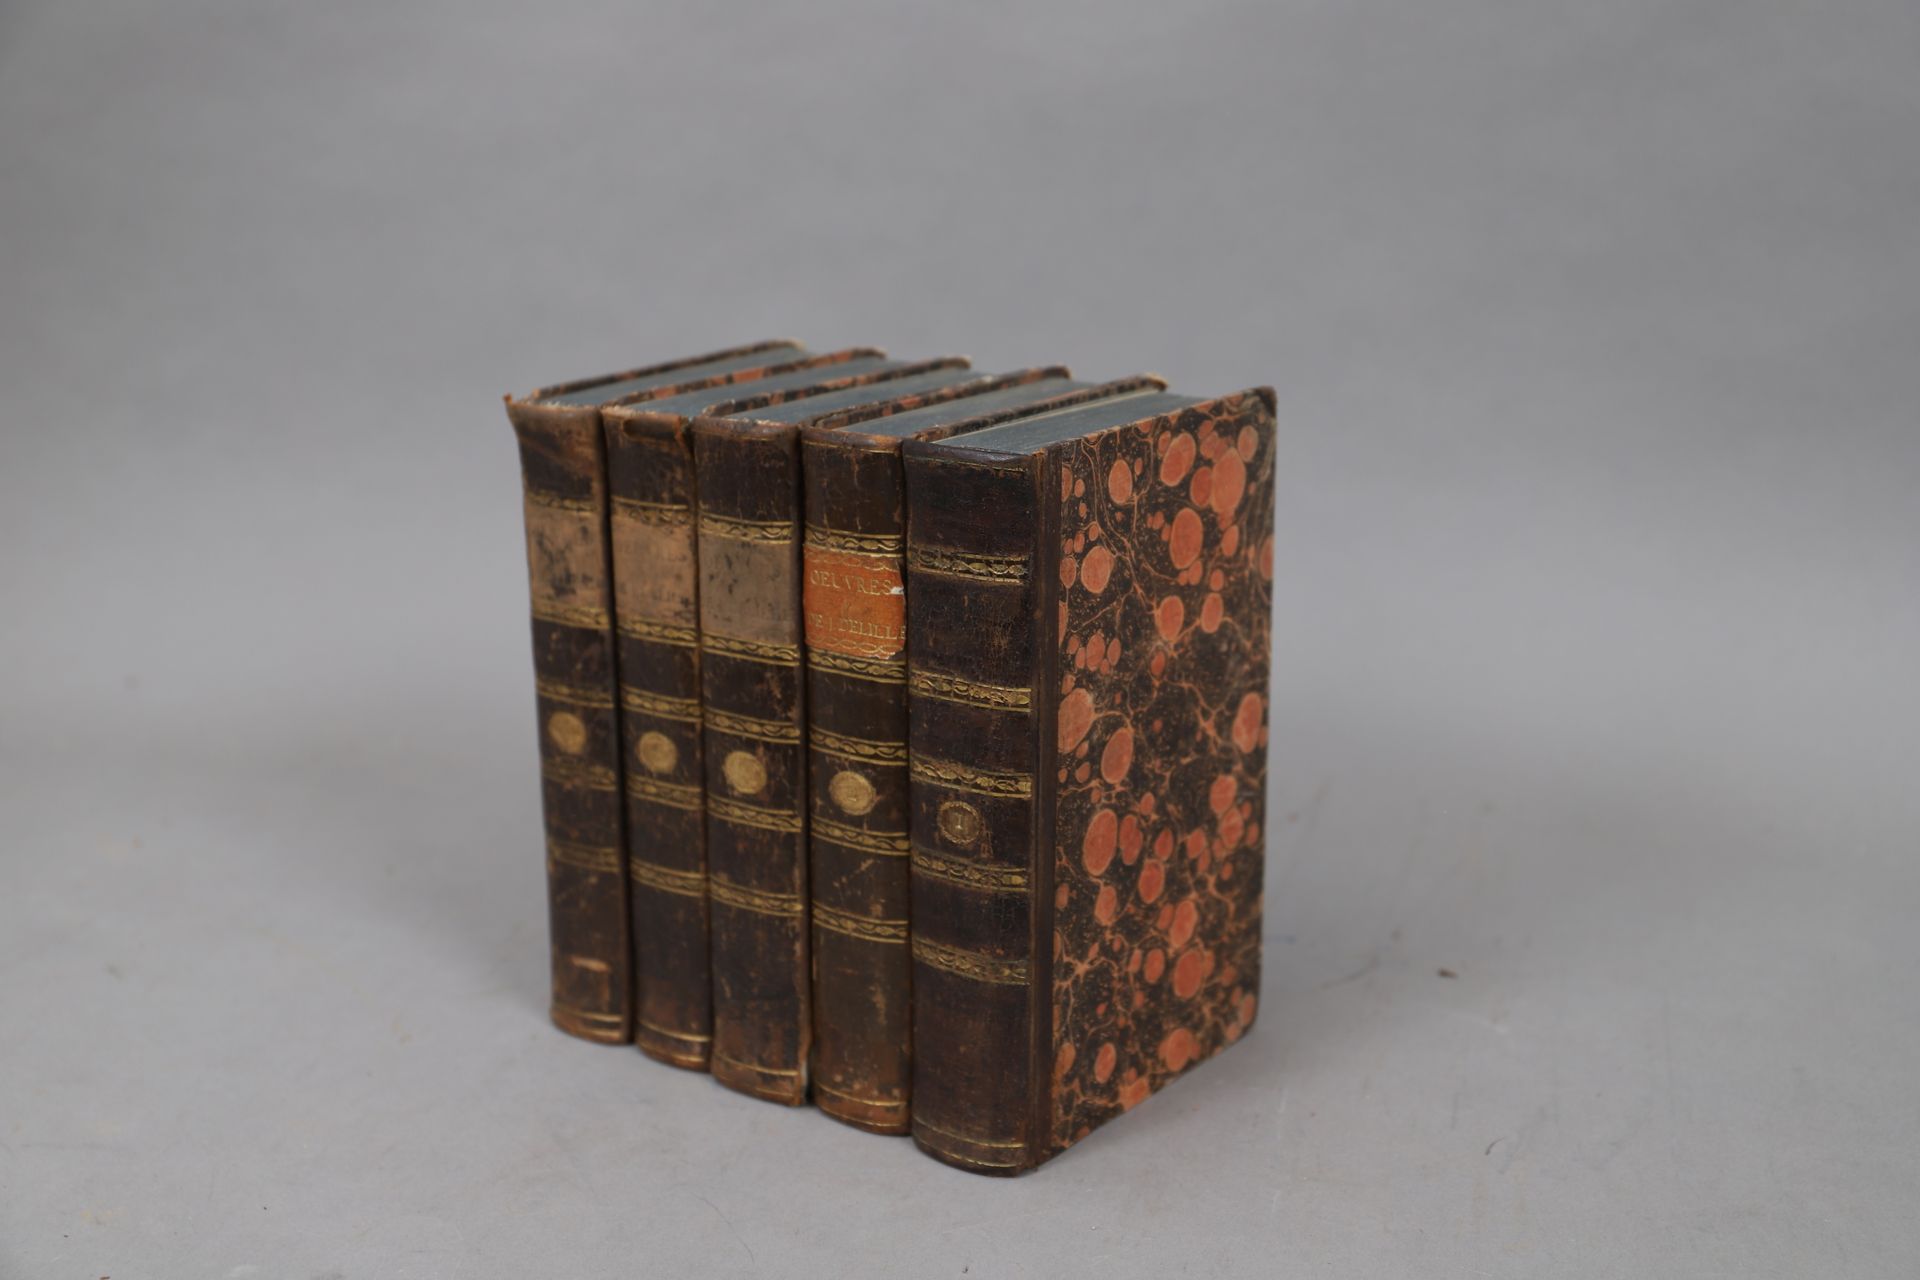 Null WORKS by DELILLE

Brussels 1817

5 bound volumes.